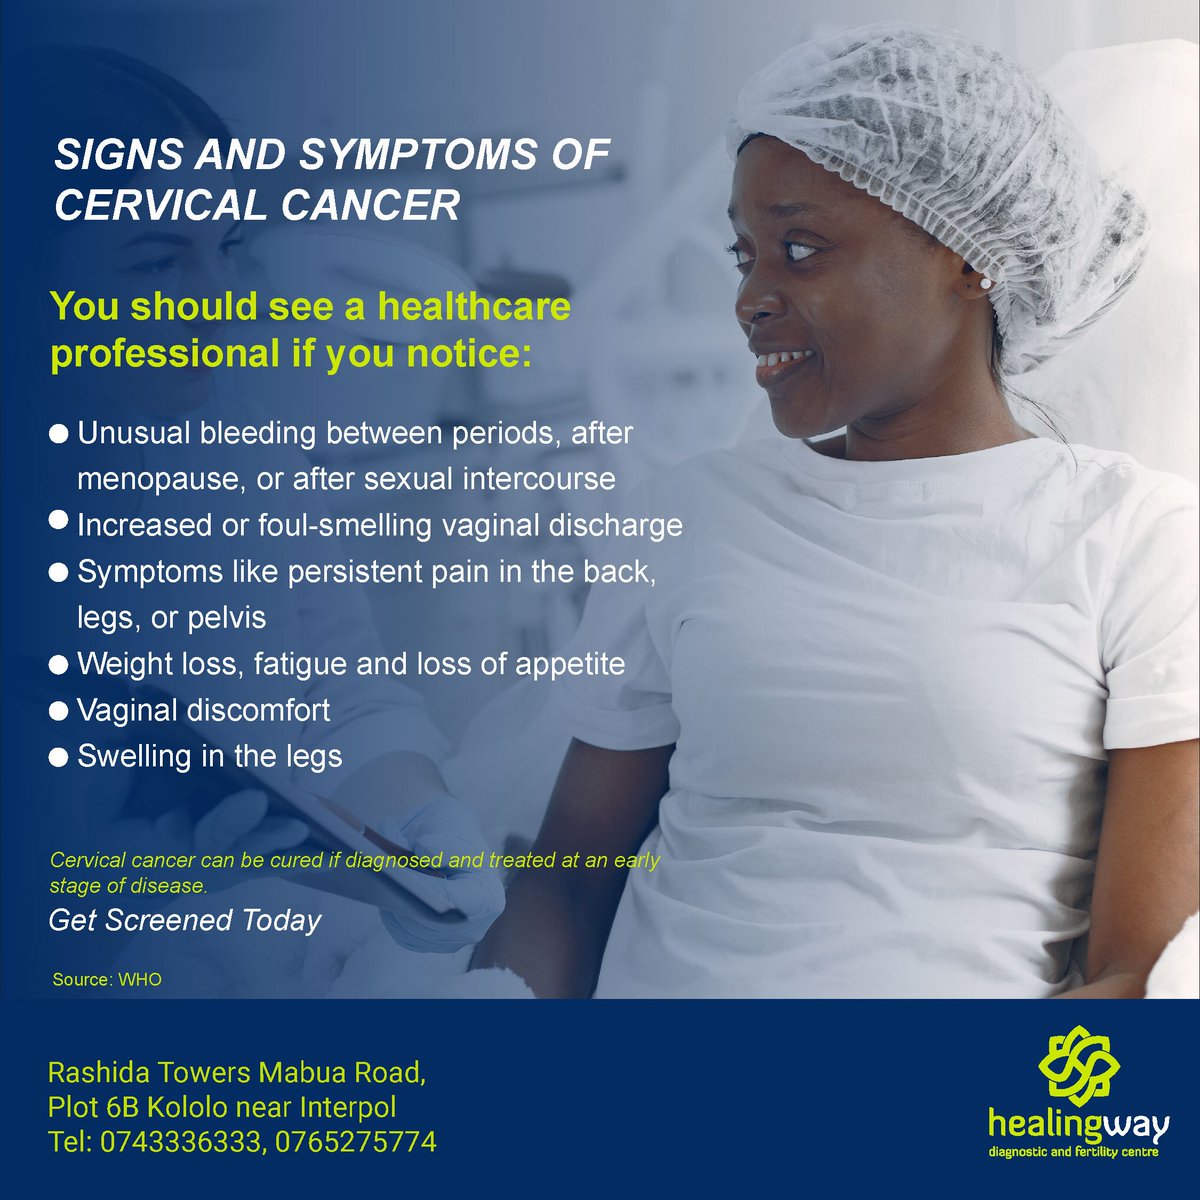 Prioritize your health! Recognizing the signs of cervical cancer is crucial. From irregular bleeding to pelvic pain, don't ignore the whispers of your body. Early detection saves lives. #Healingway #CervicalCancerAwareness #ListenToYourBody #ScreeningSavesLives'